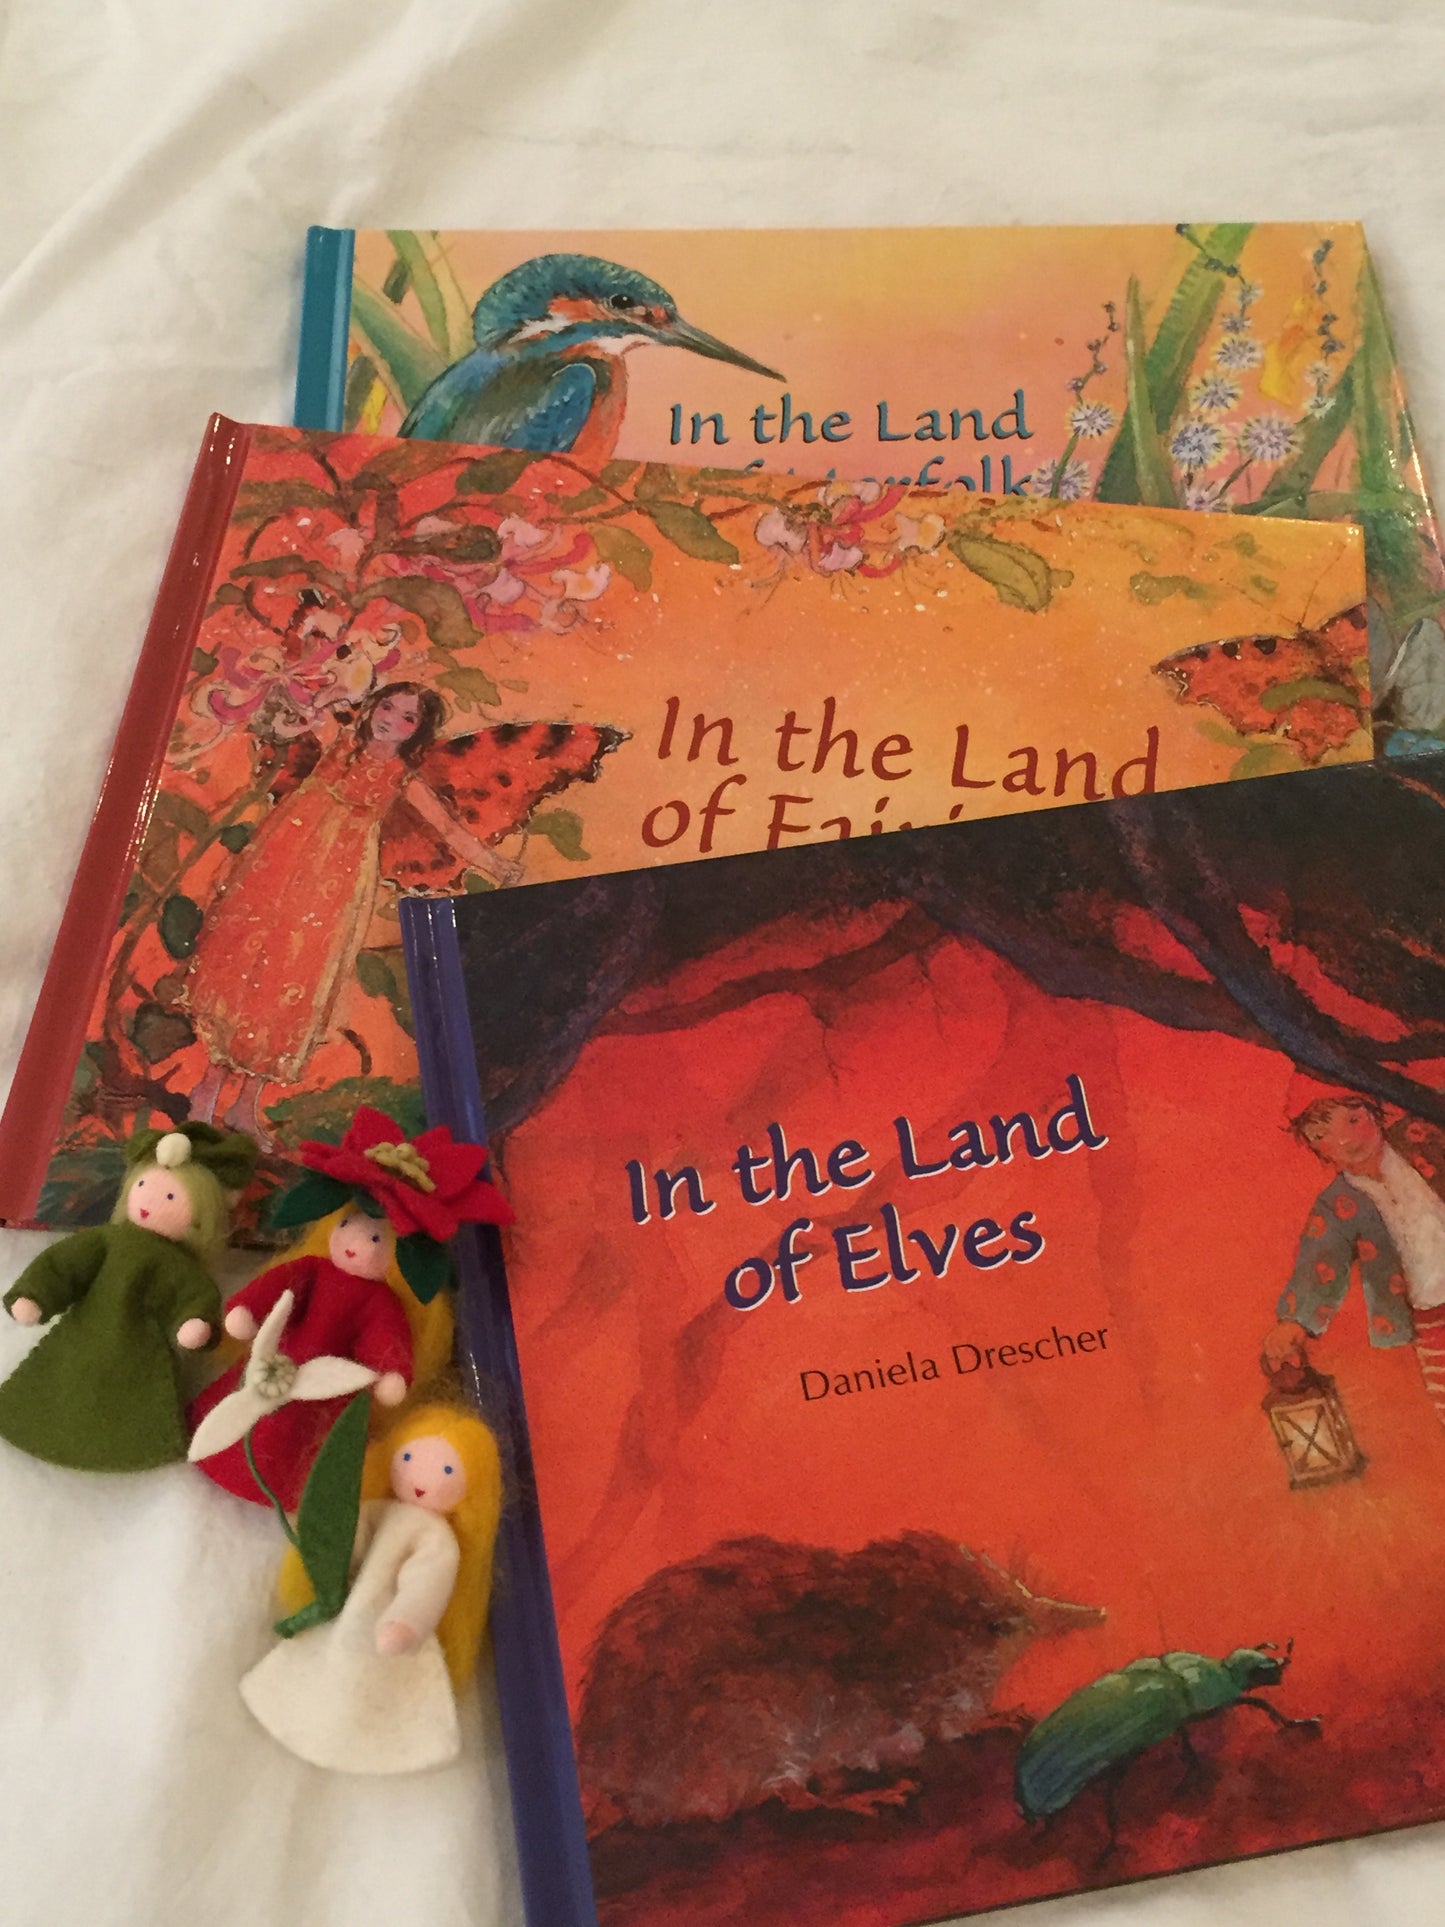 Children's Picture Book - IN THE LAND OF MERFOLK